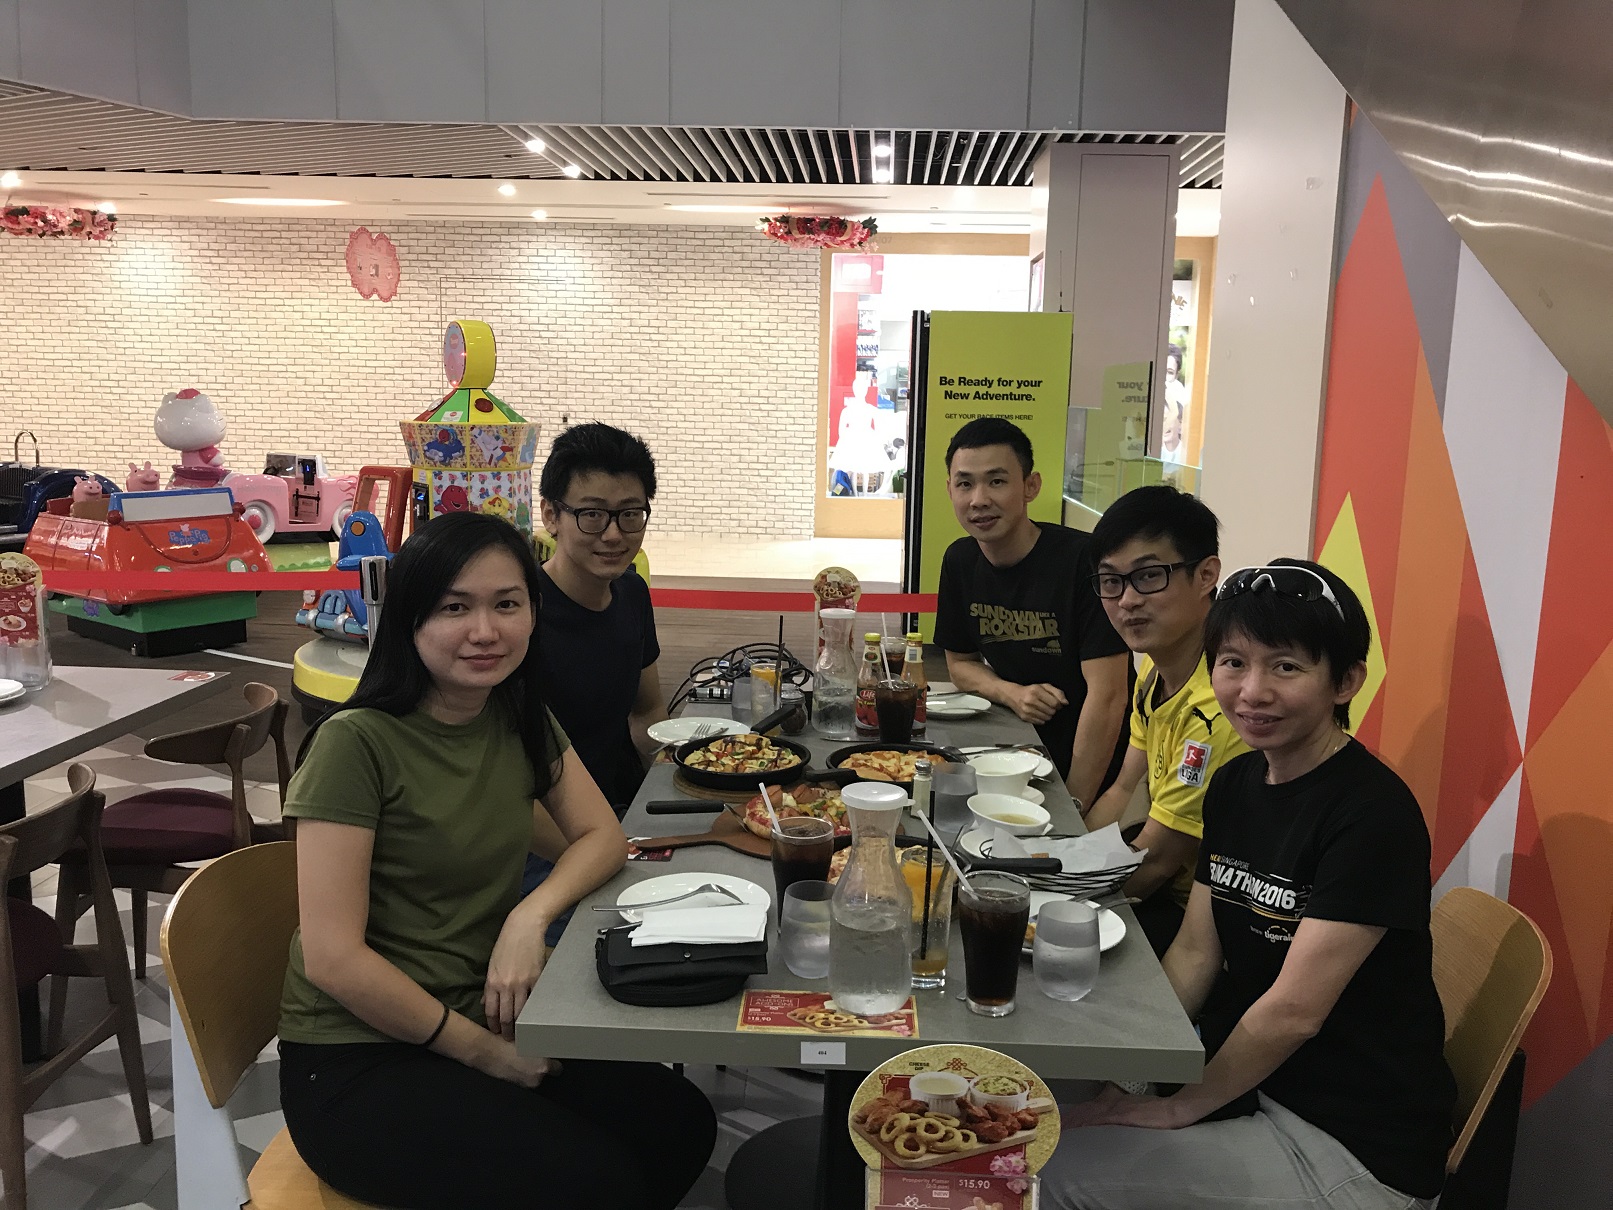 Catching up with Friends of HiVe! Thanks for farewell lunch!